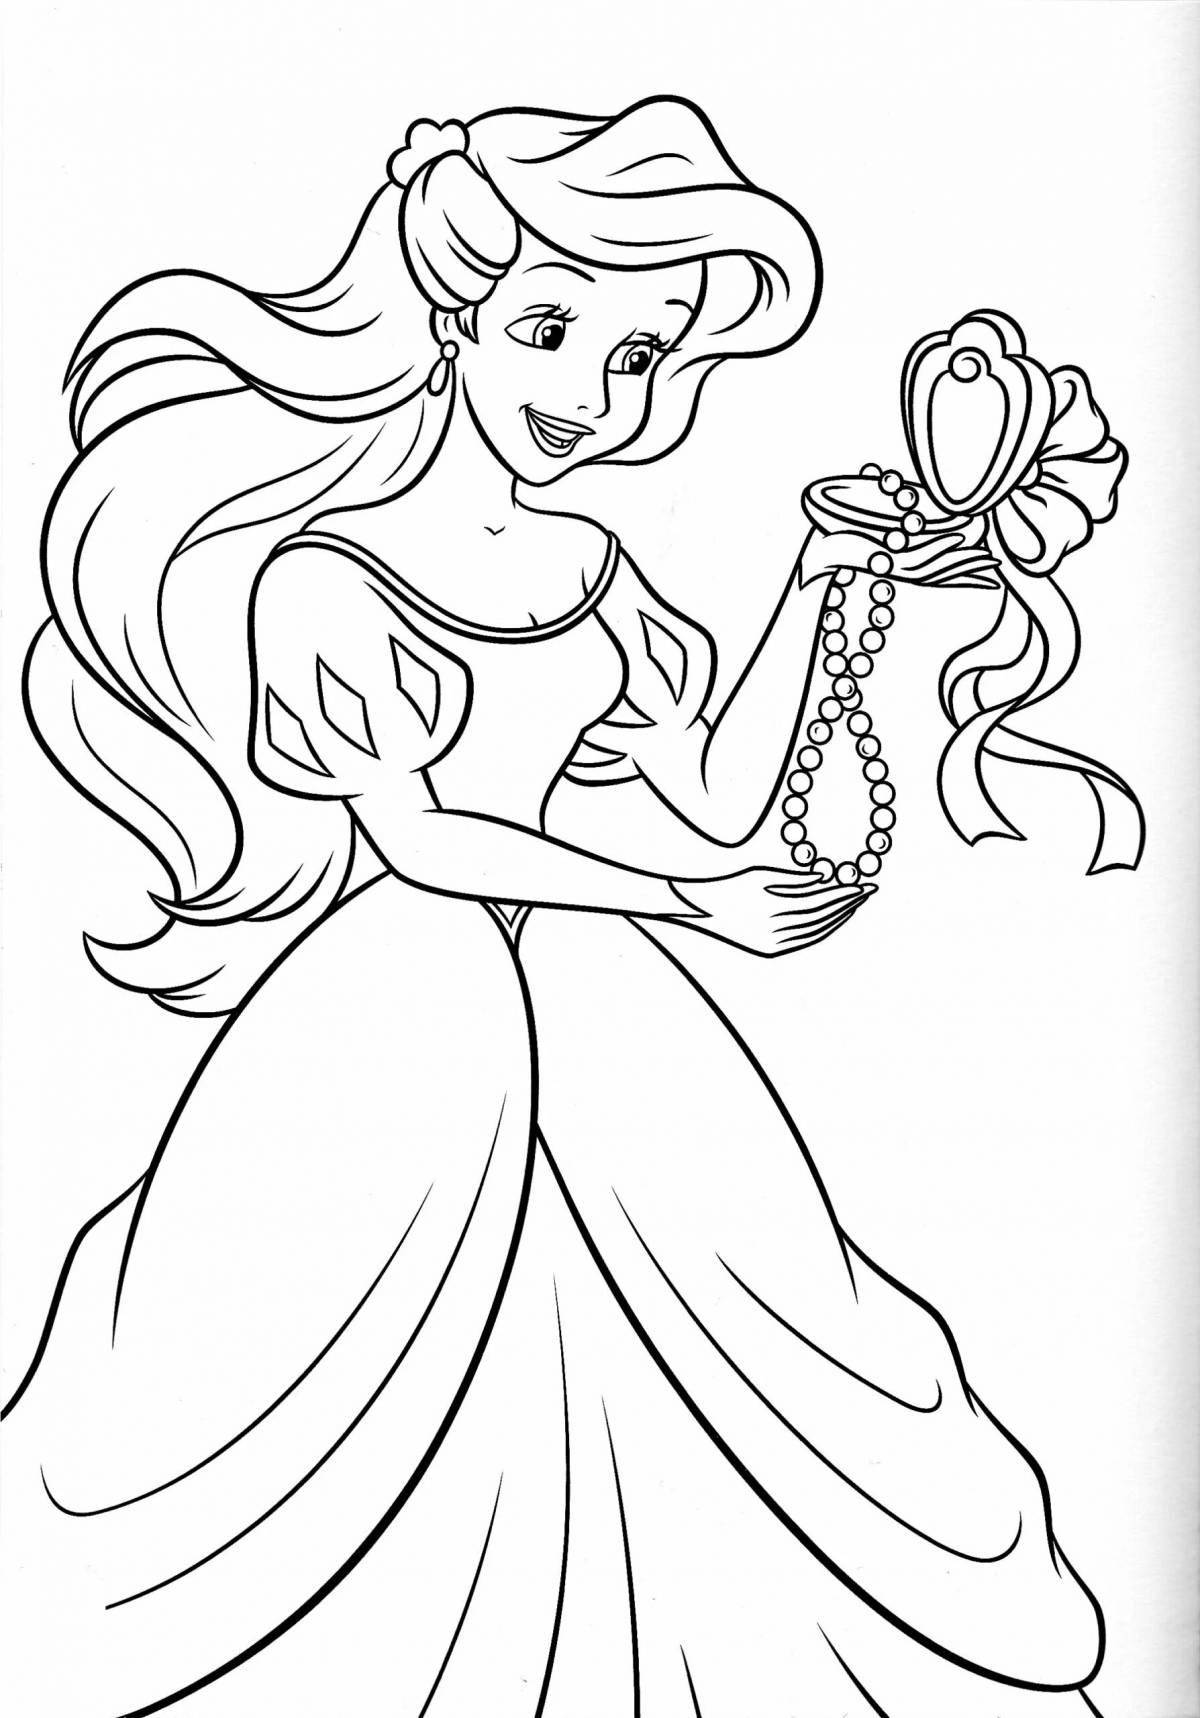 Outstanding princess coloring pages for girls 7 years old